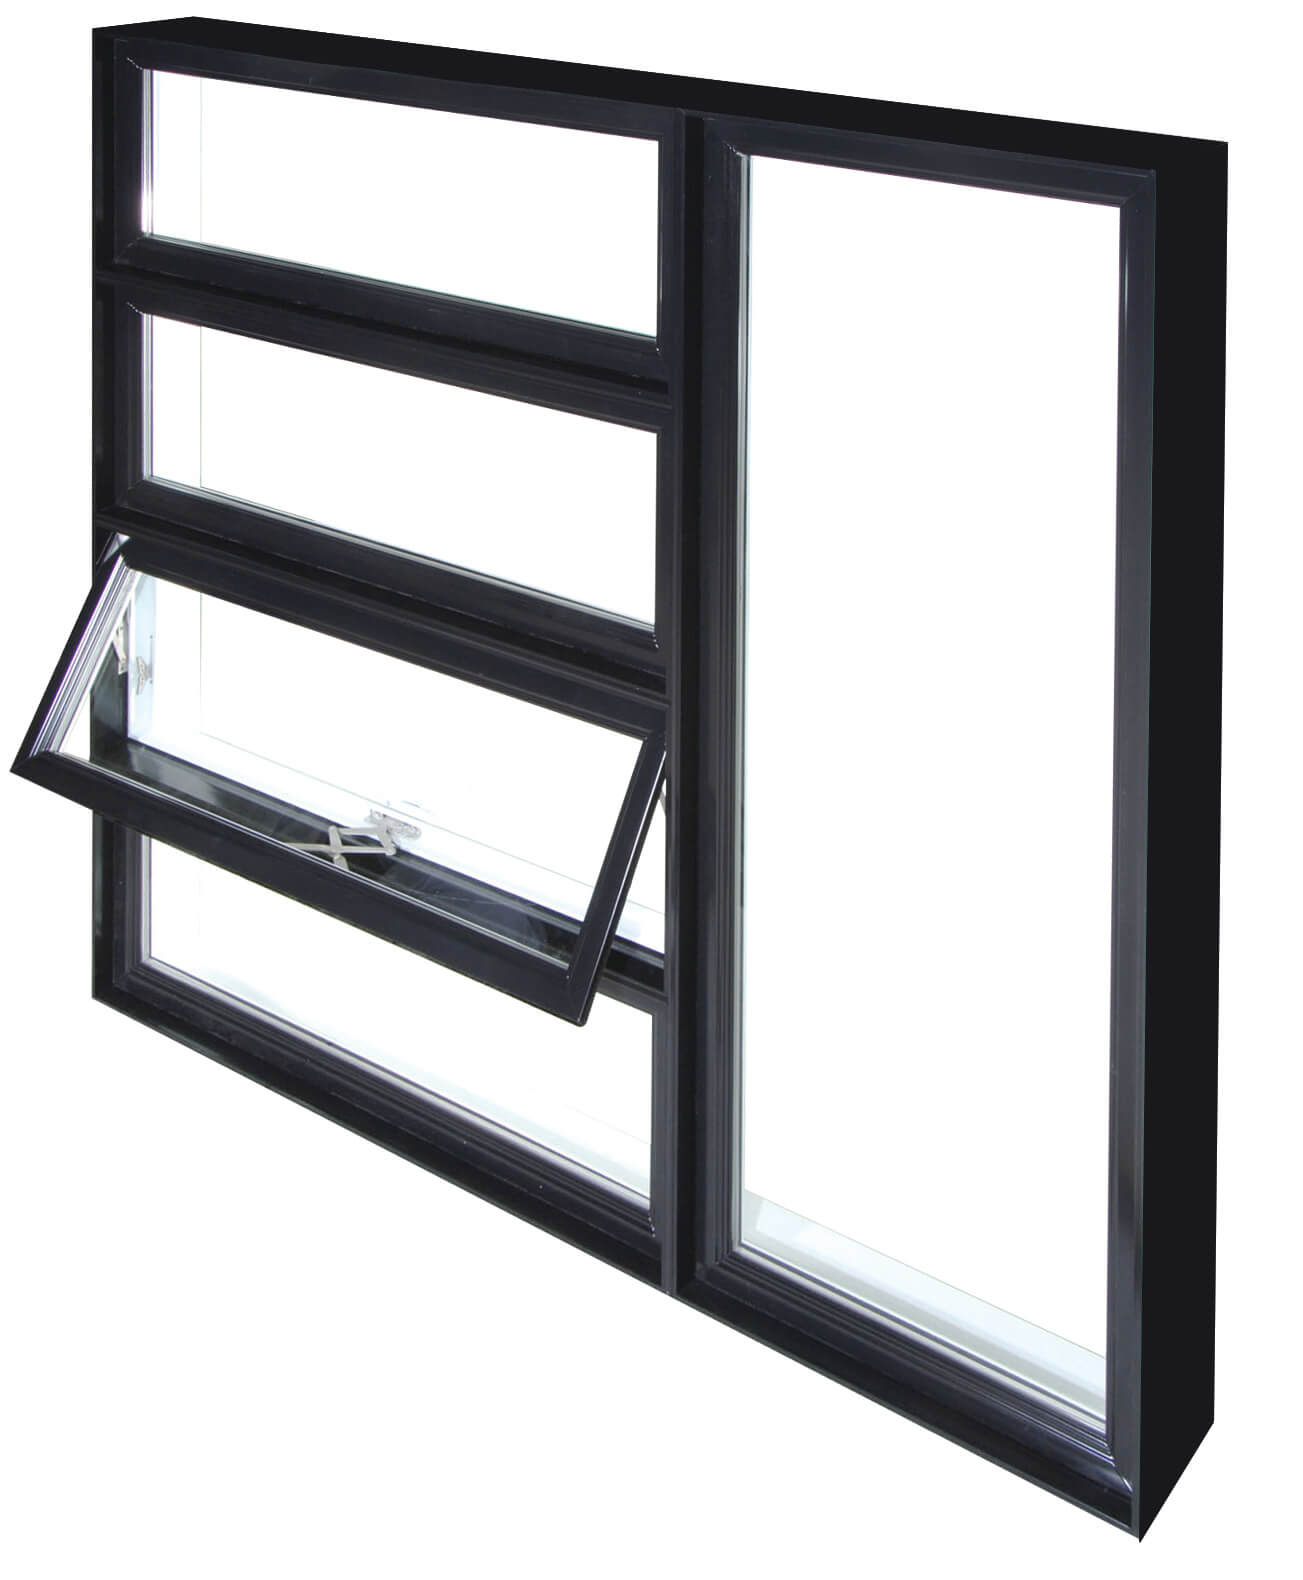 Awning window model duo awning-casement black frame: 4 horizontal rectangular panes on the left, 1 vertical pane on the right